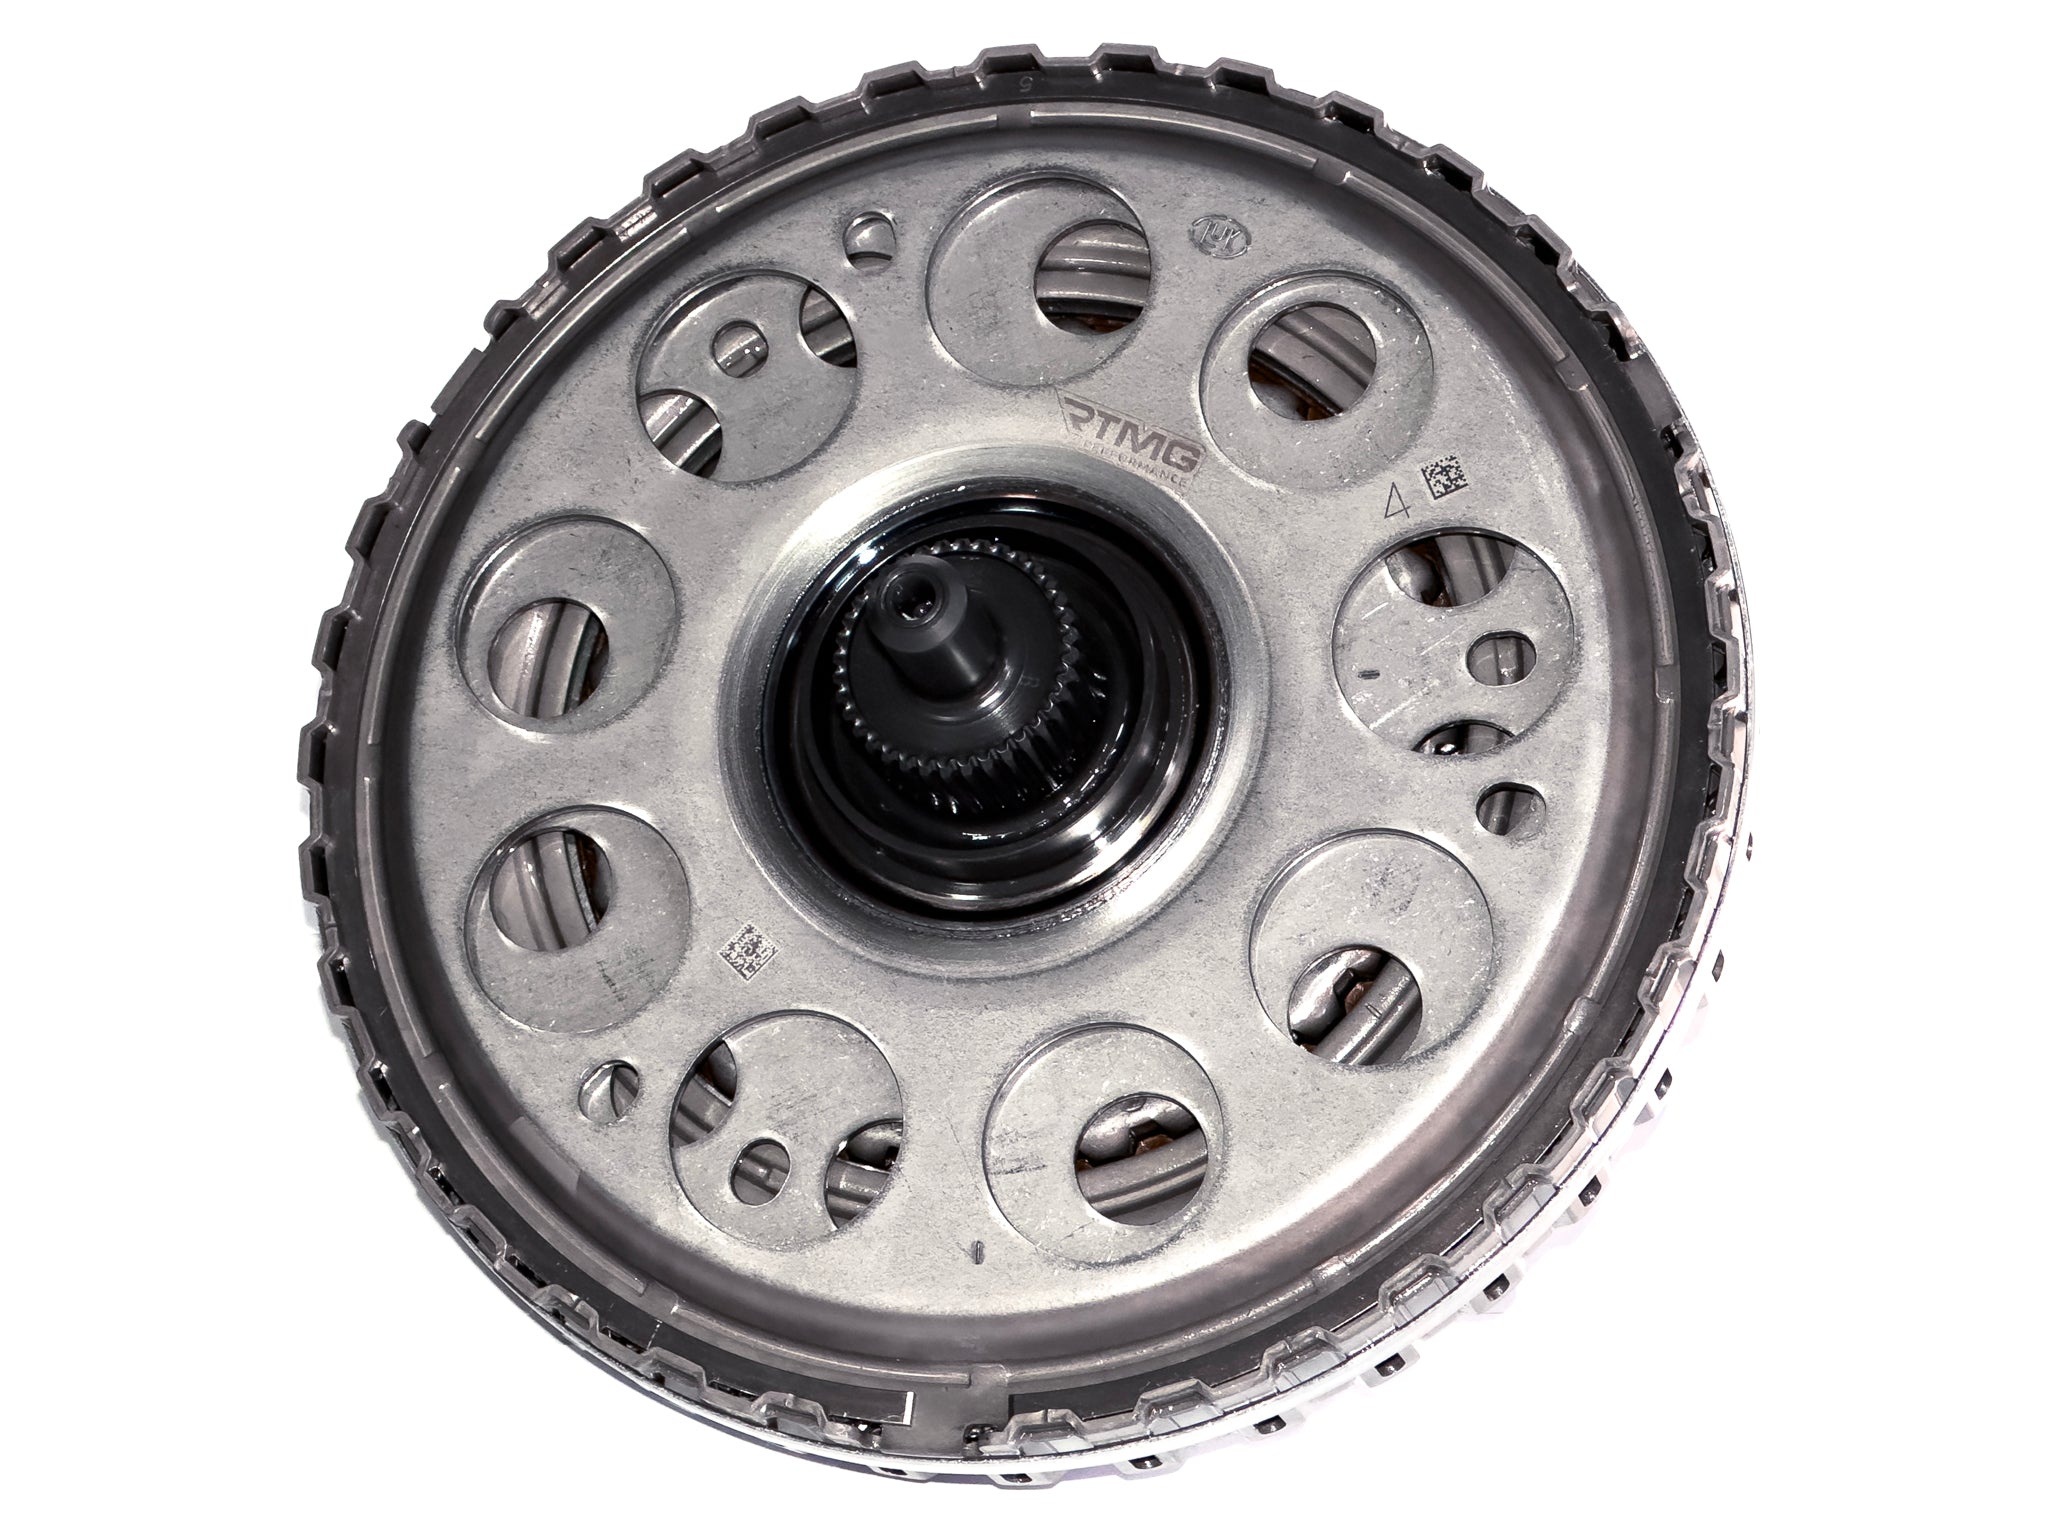 DSG DQ381 (0DW) - Upgraded Clutch up to 25% more torque handling - RTMG Performance